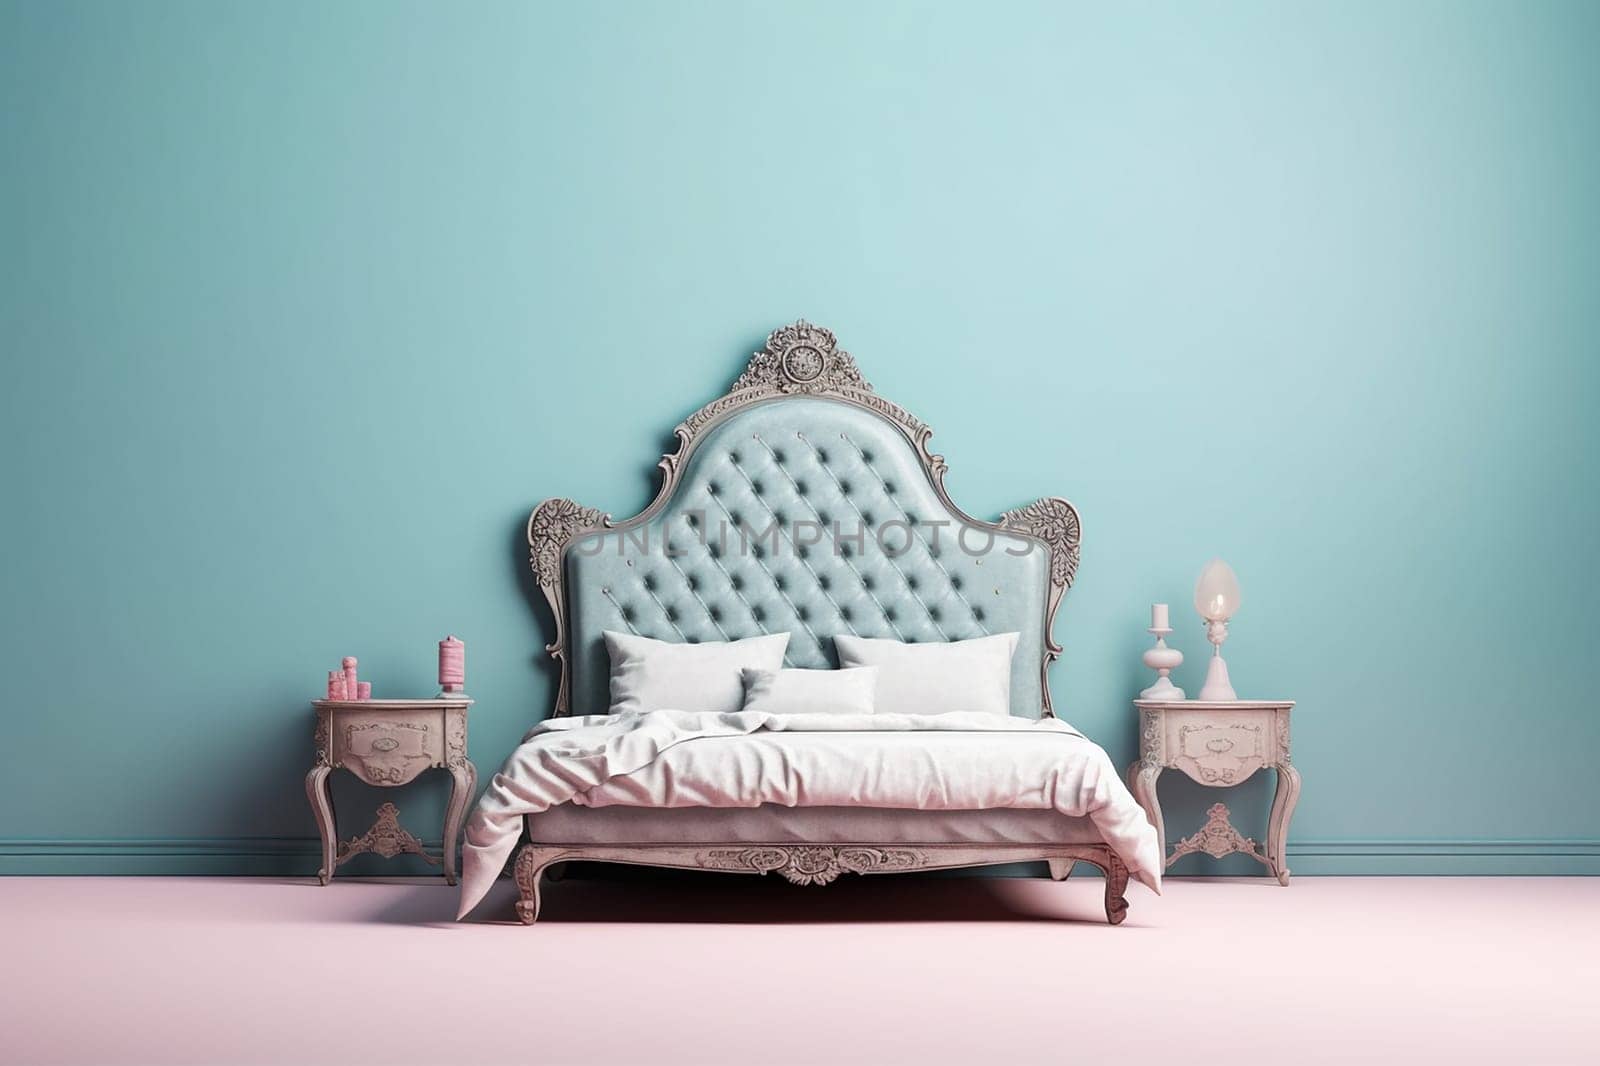 Elegant luxury classic bedroom interior with a classic tufted bed, stylish bedside tables, and a soft blue wall.